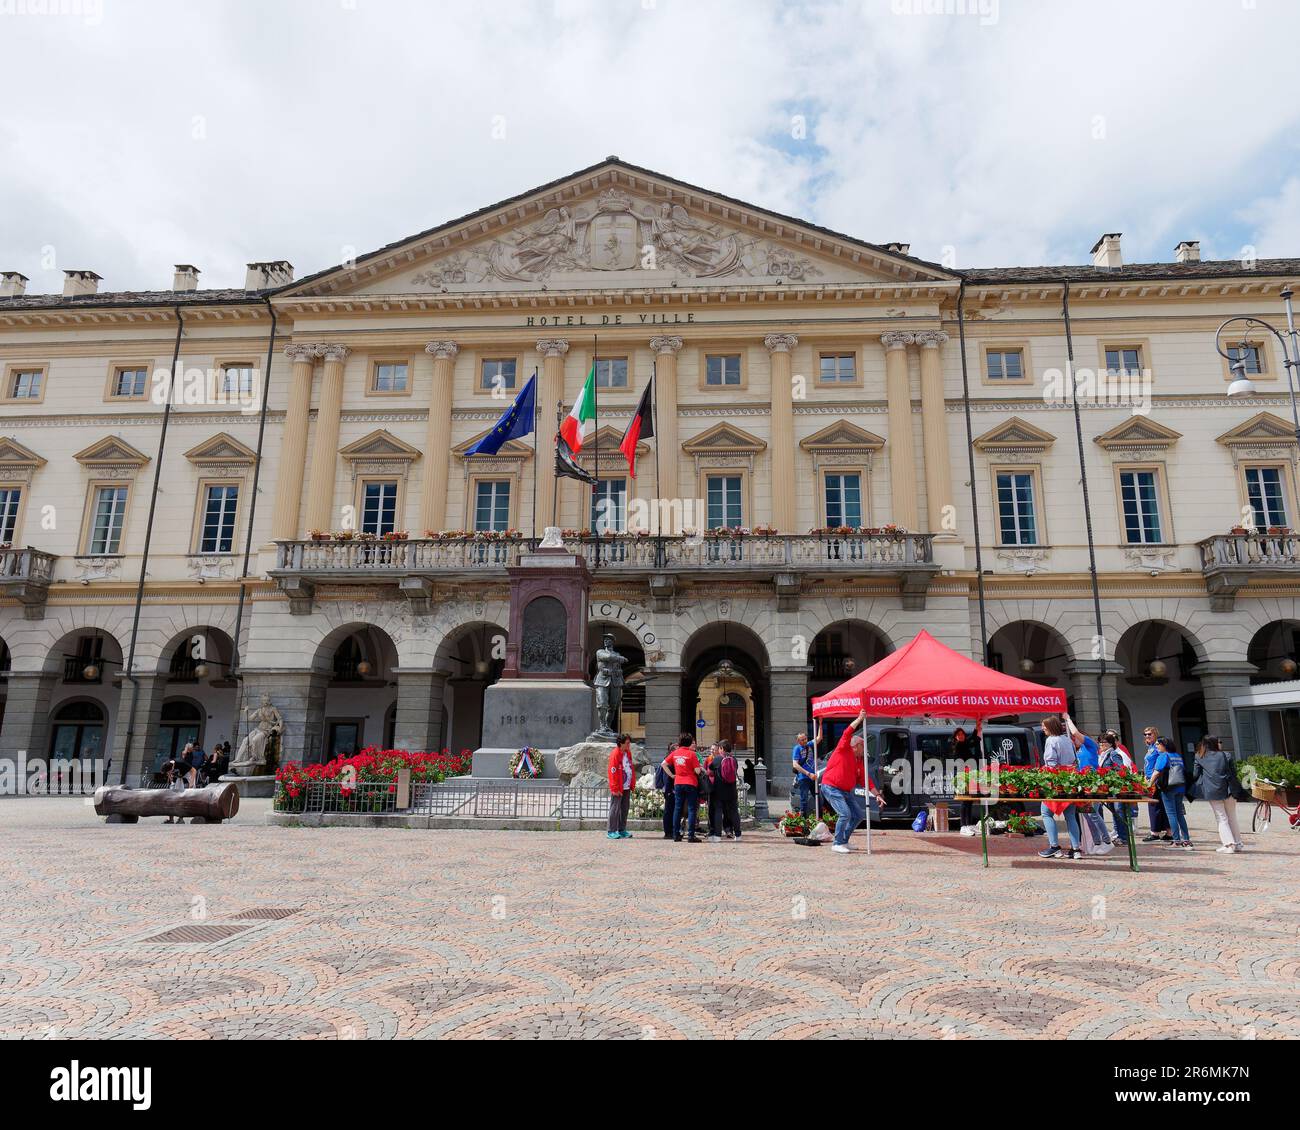 Blood donation stall in front of the Town Hall in the main square, Piazza Emile Chanoux, city of Aosta, Aosta Valley Italy Stock Photo